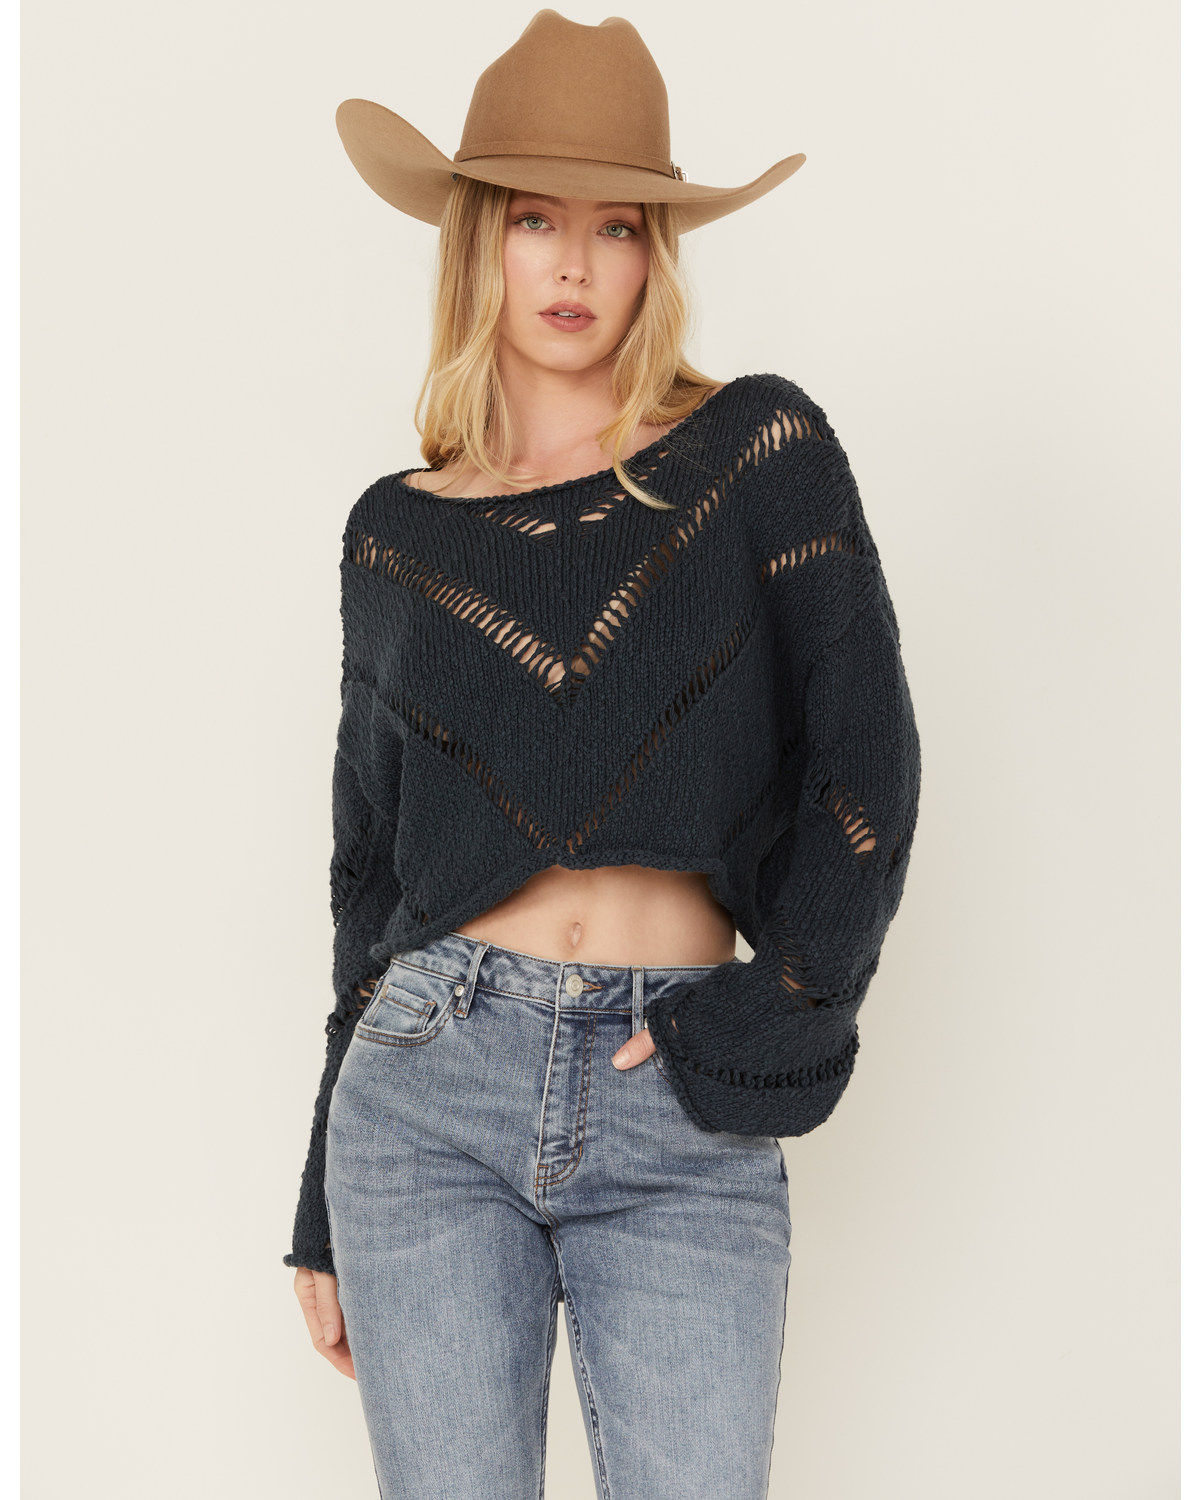 Free People Women's Distressed Cropped Sweater